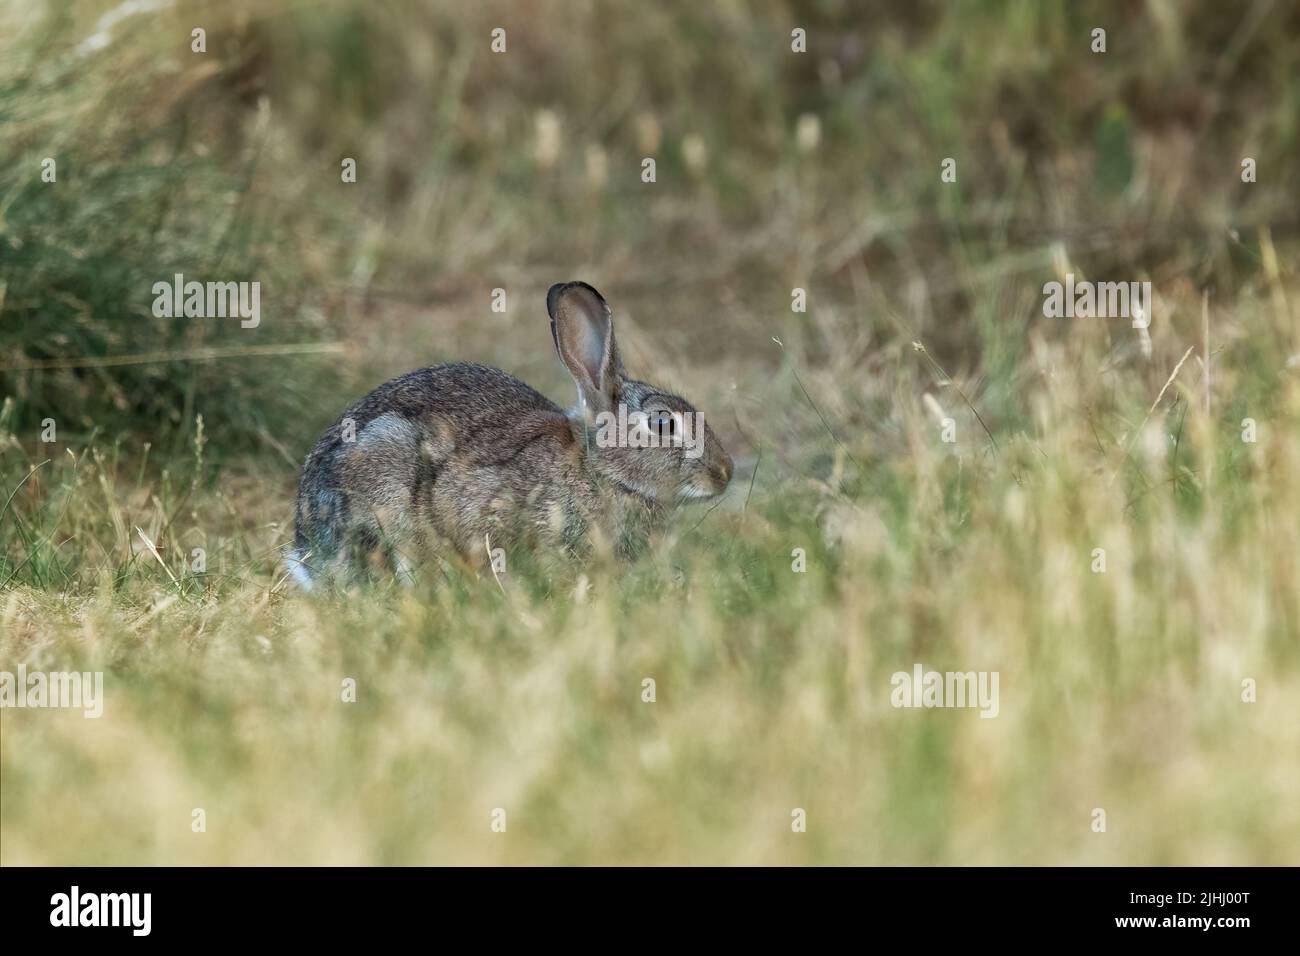 Rabbit (Oryctolagus cuniculus) in a meadow Stock Photo